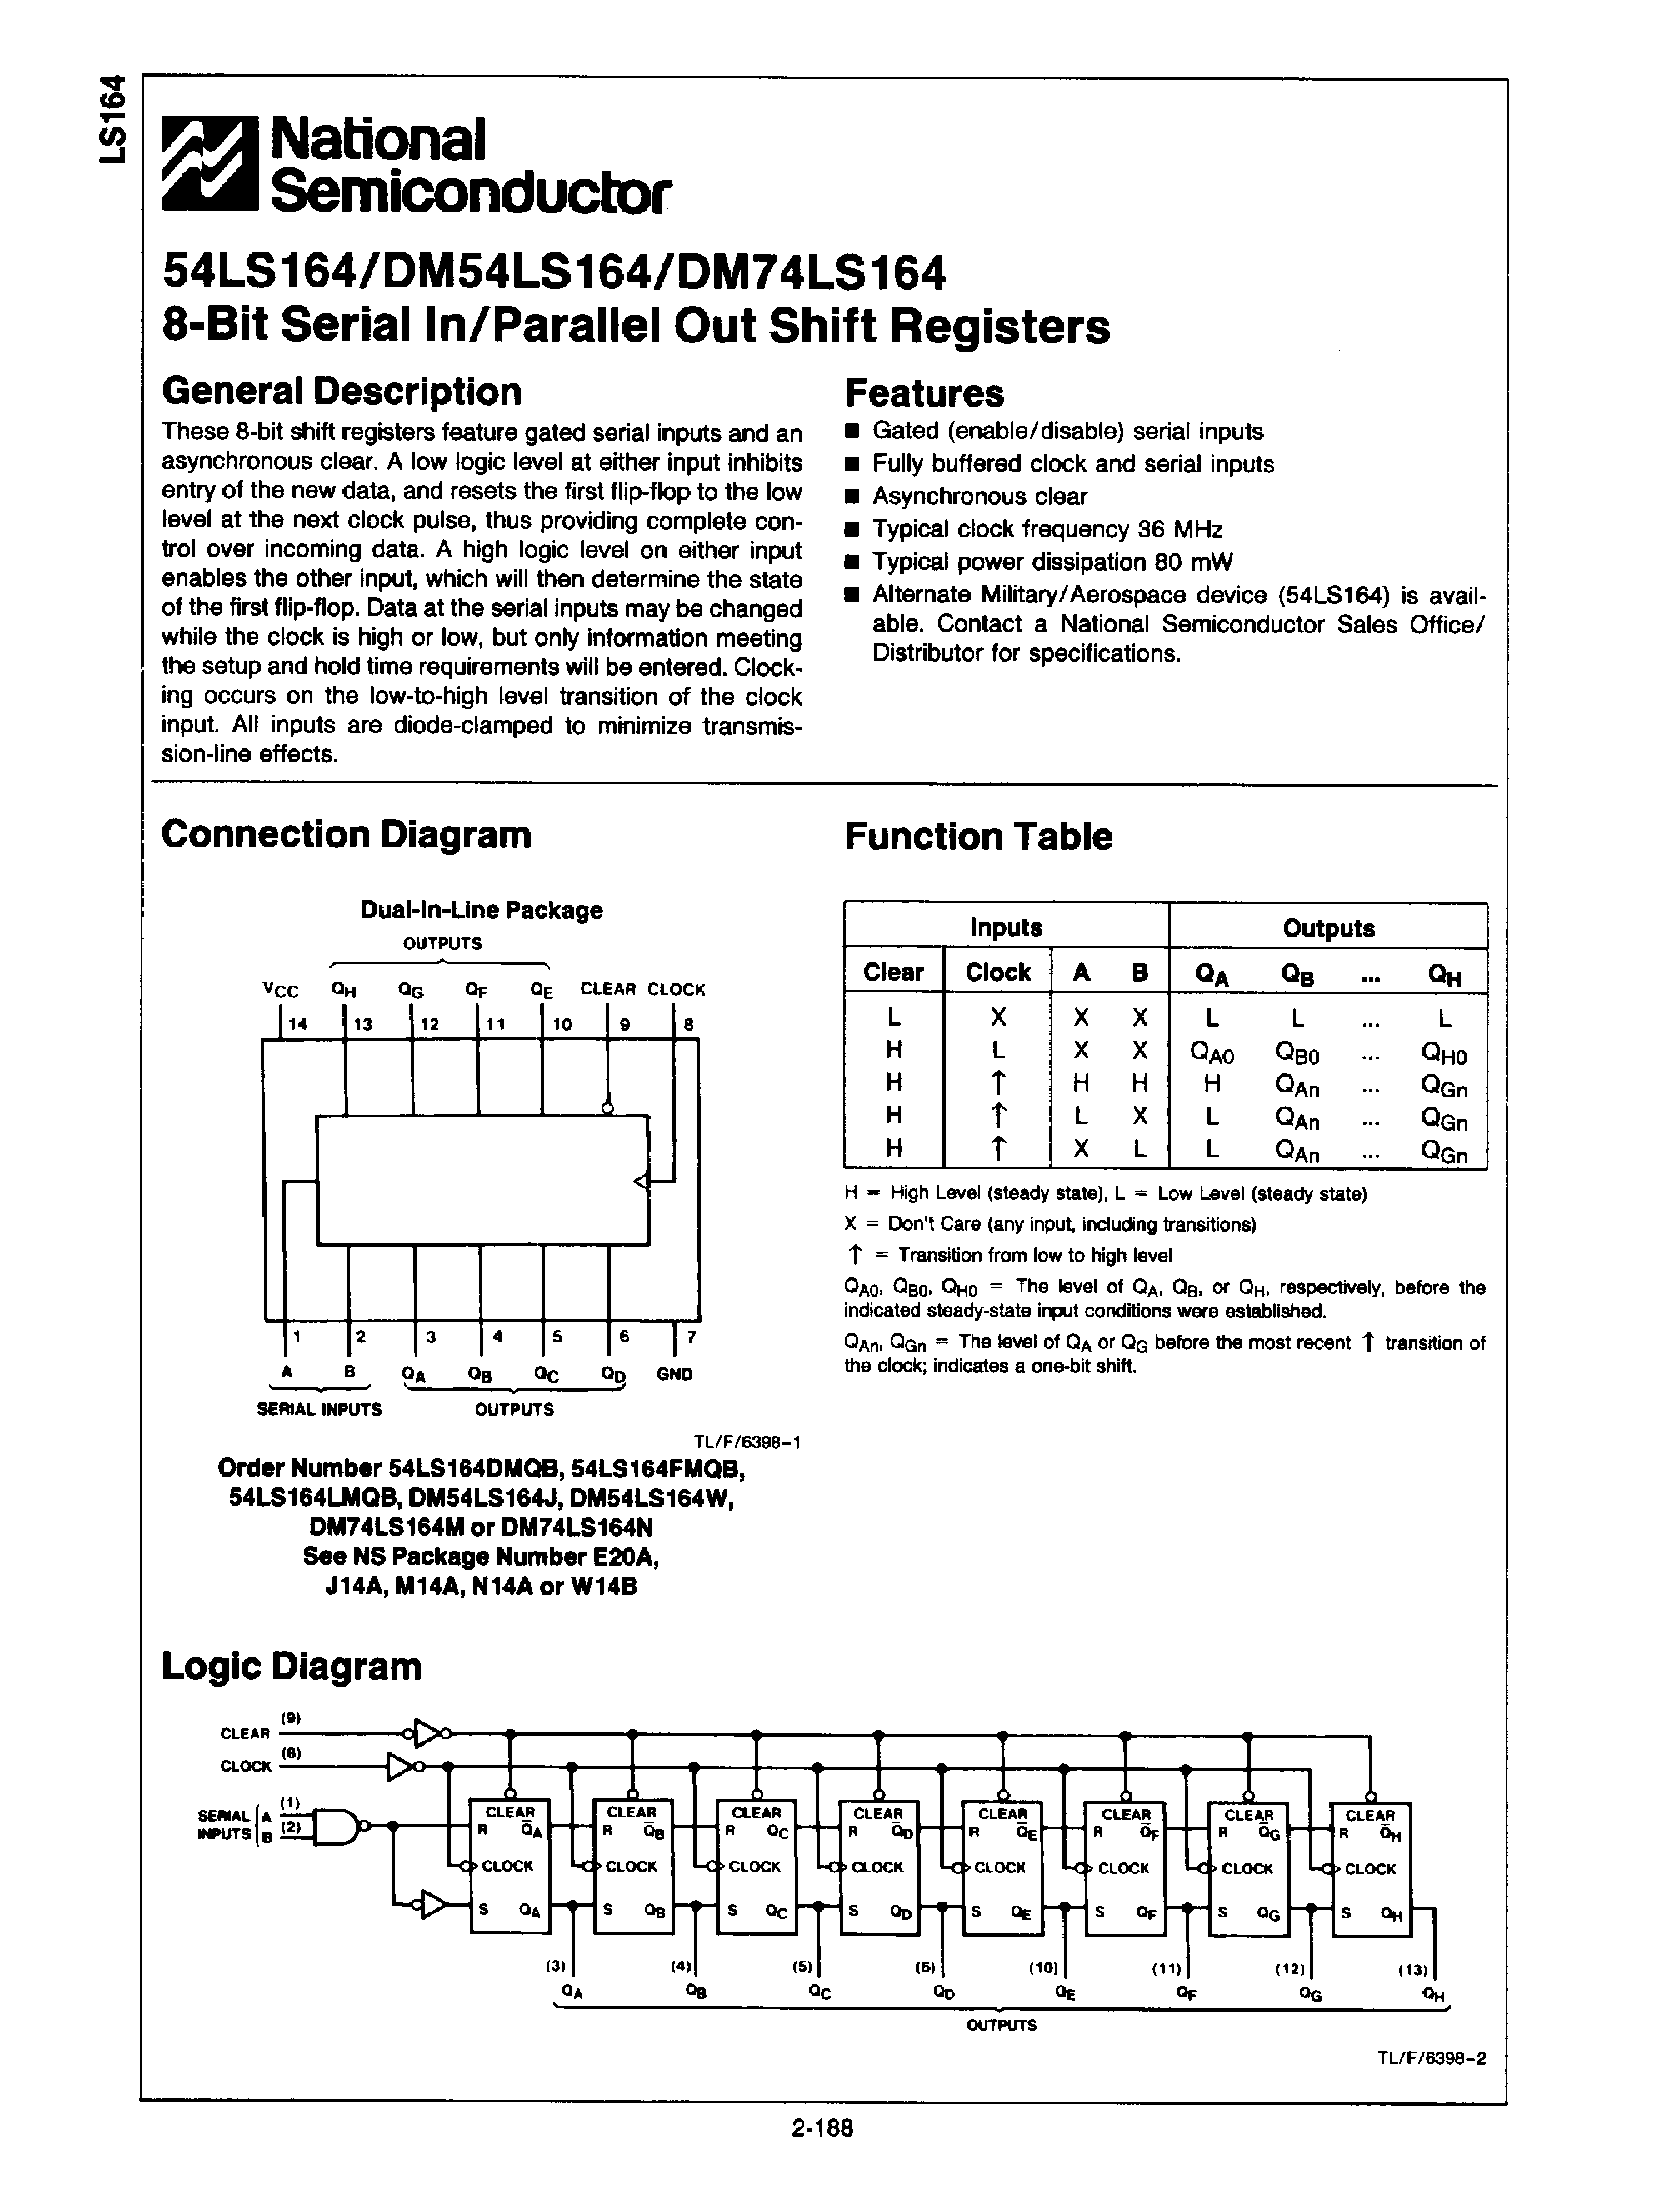 Даташит 54LS164 - 8-Bit Parallel-Out Serial Shift Registers страница 1